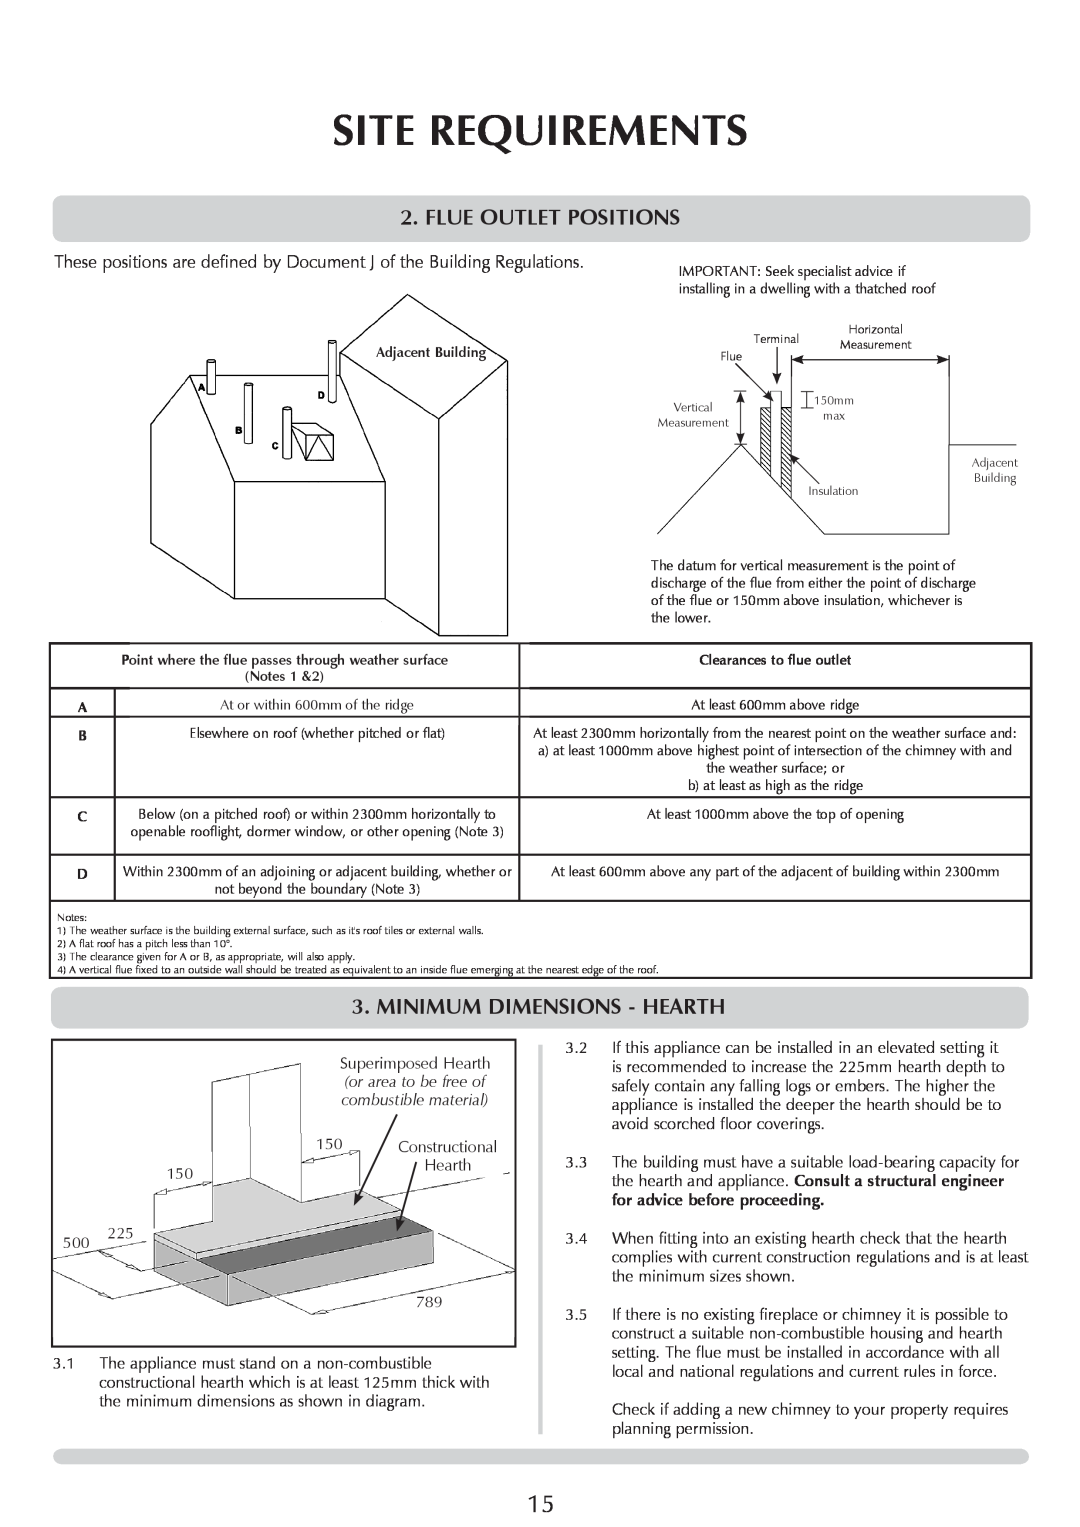 Yeoman YMMB manual Flue Outlet Positions, Minimum dimensions - HEARTH, Site Requirements, for advice before proceeding 